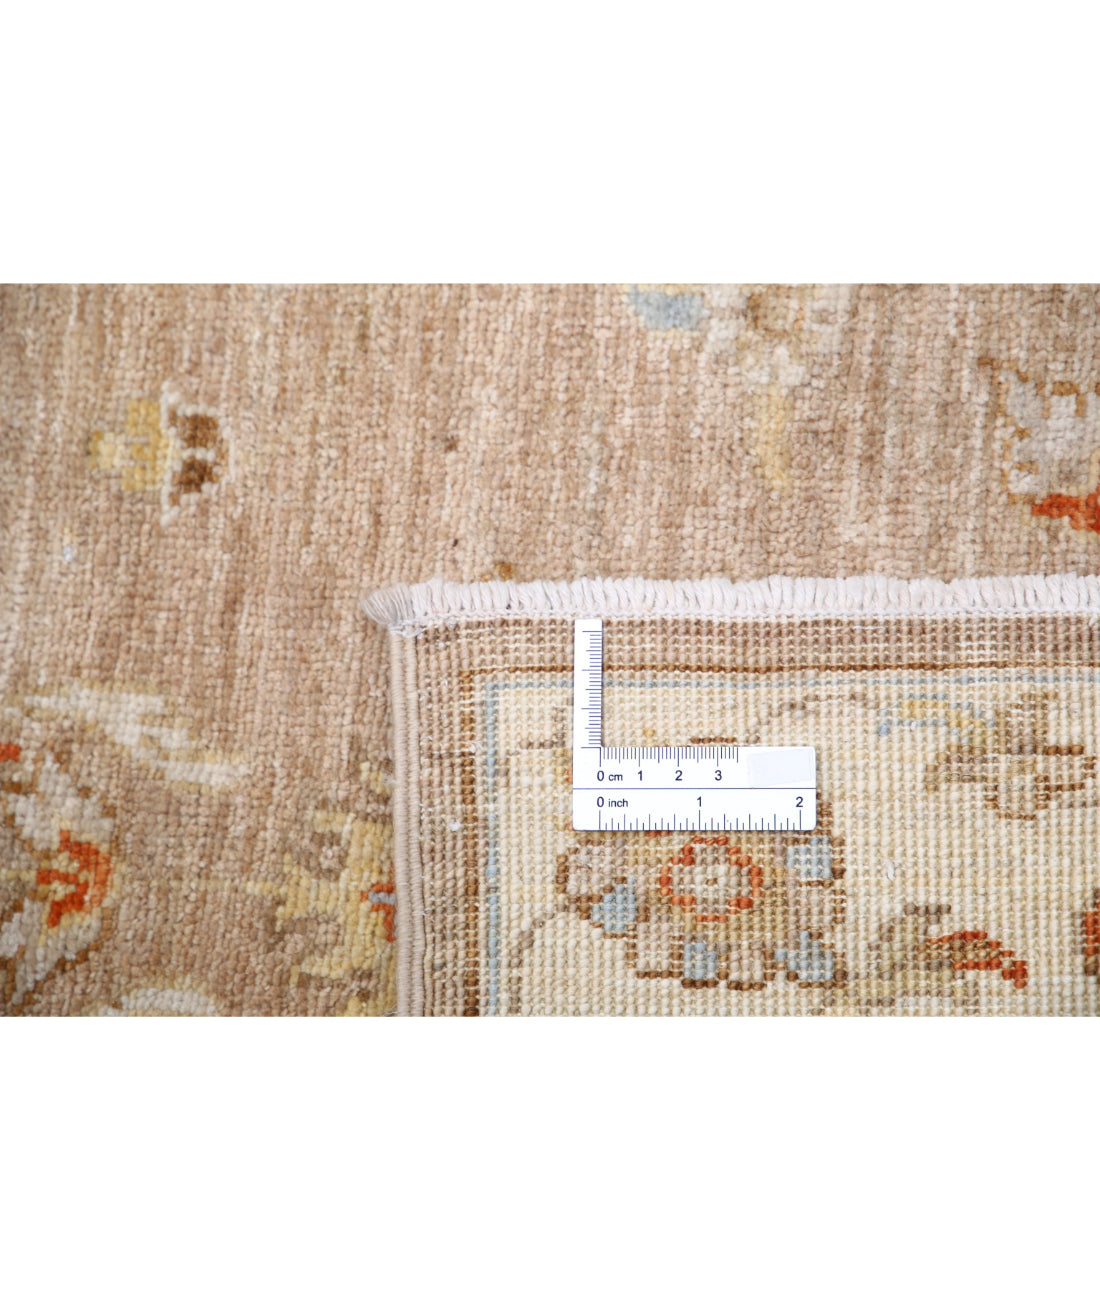 Ziegler 2'6'' X 7'10'' Hand-Knotted Wool Rug 2'6'' x 7'10'' (75 X 235) / Brown / Ivory